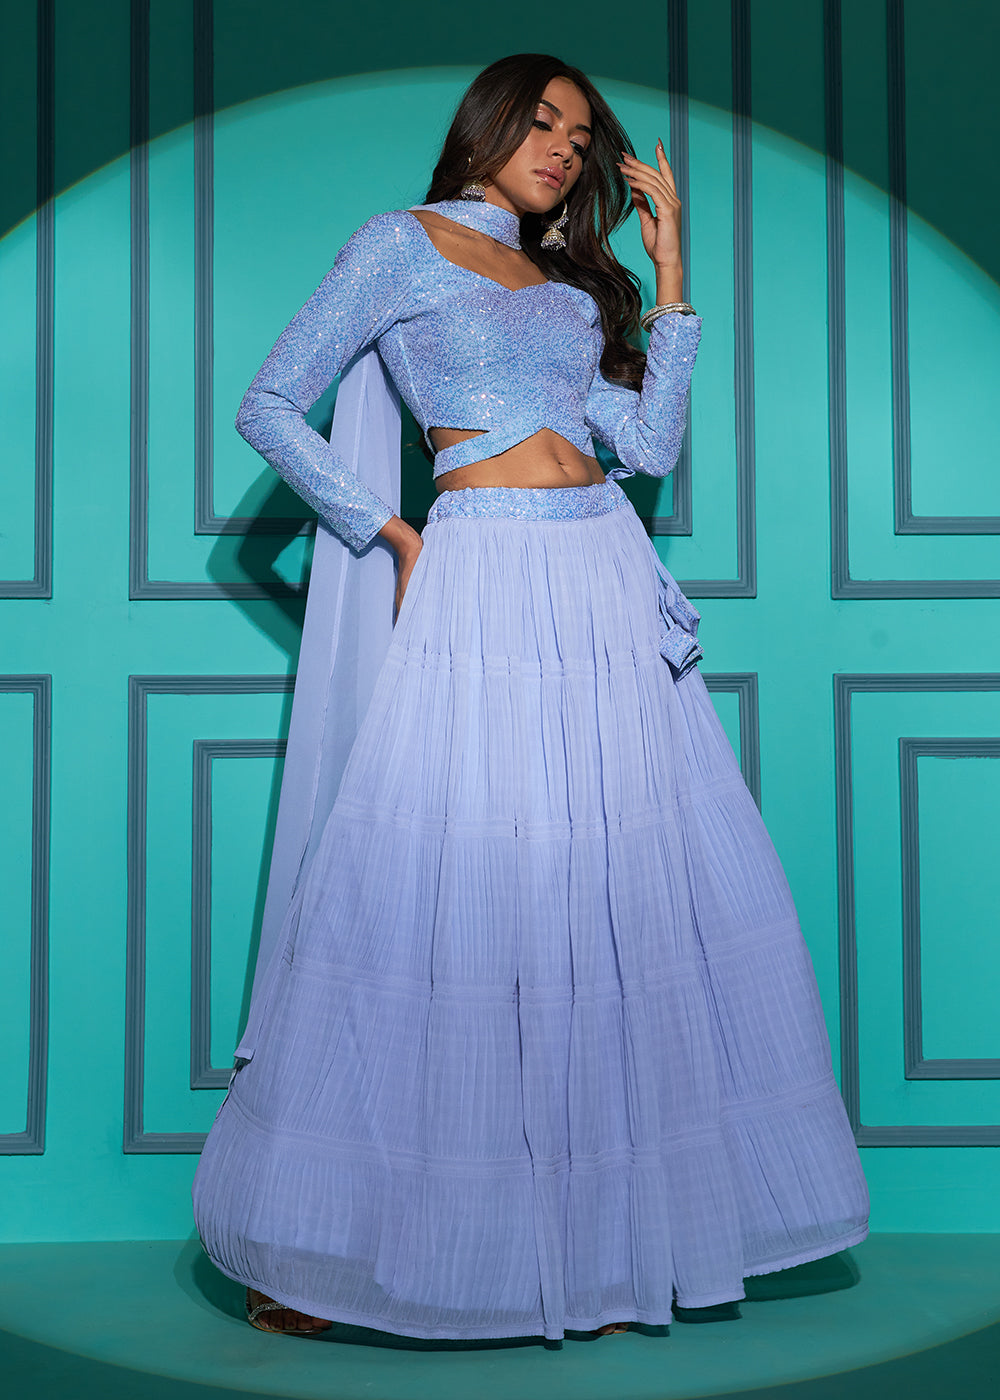 Buy Now Exquisite Dusty Blue Georgette Wedding Party Lehenga Choli Online in USA, UK, Canada & Worldwide at Empress Clothing.